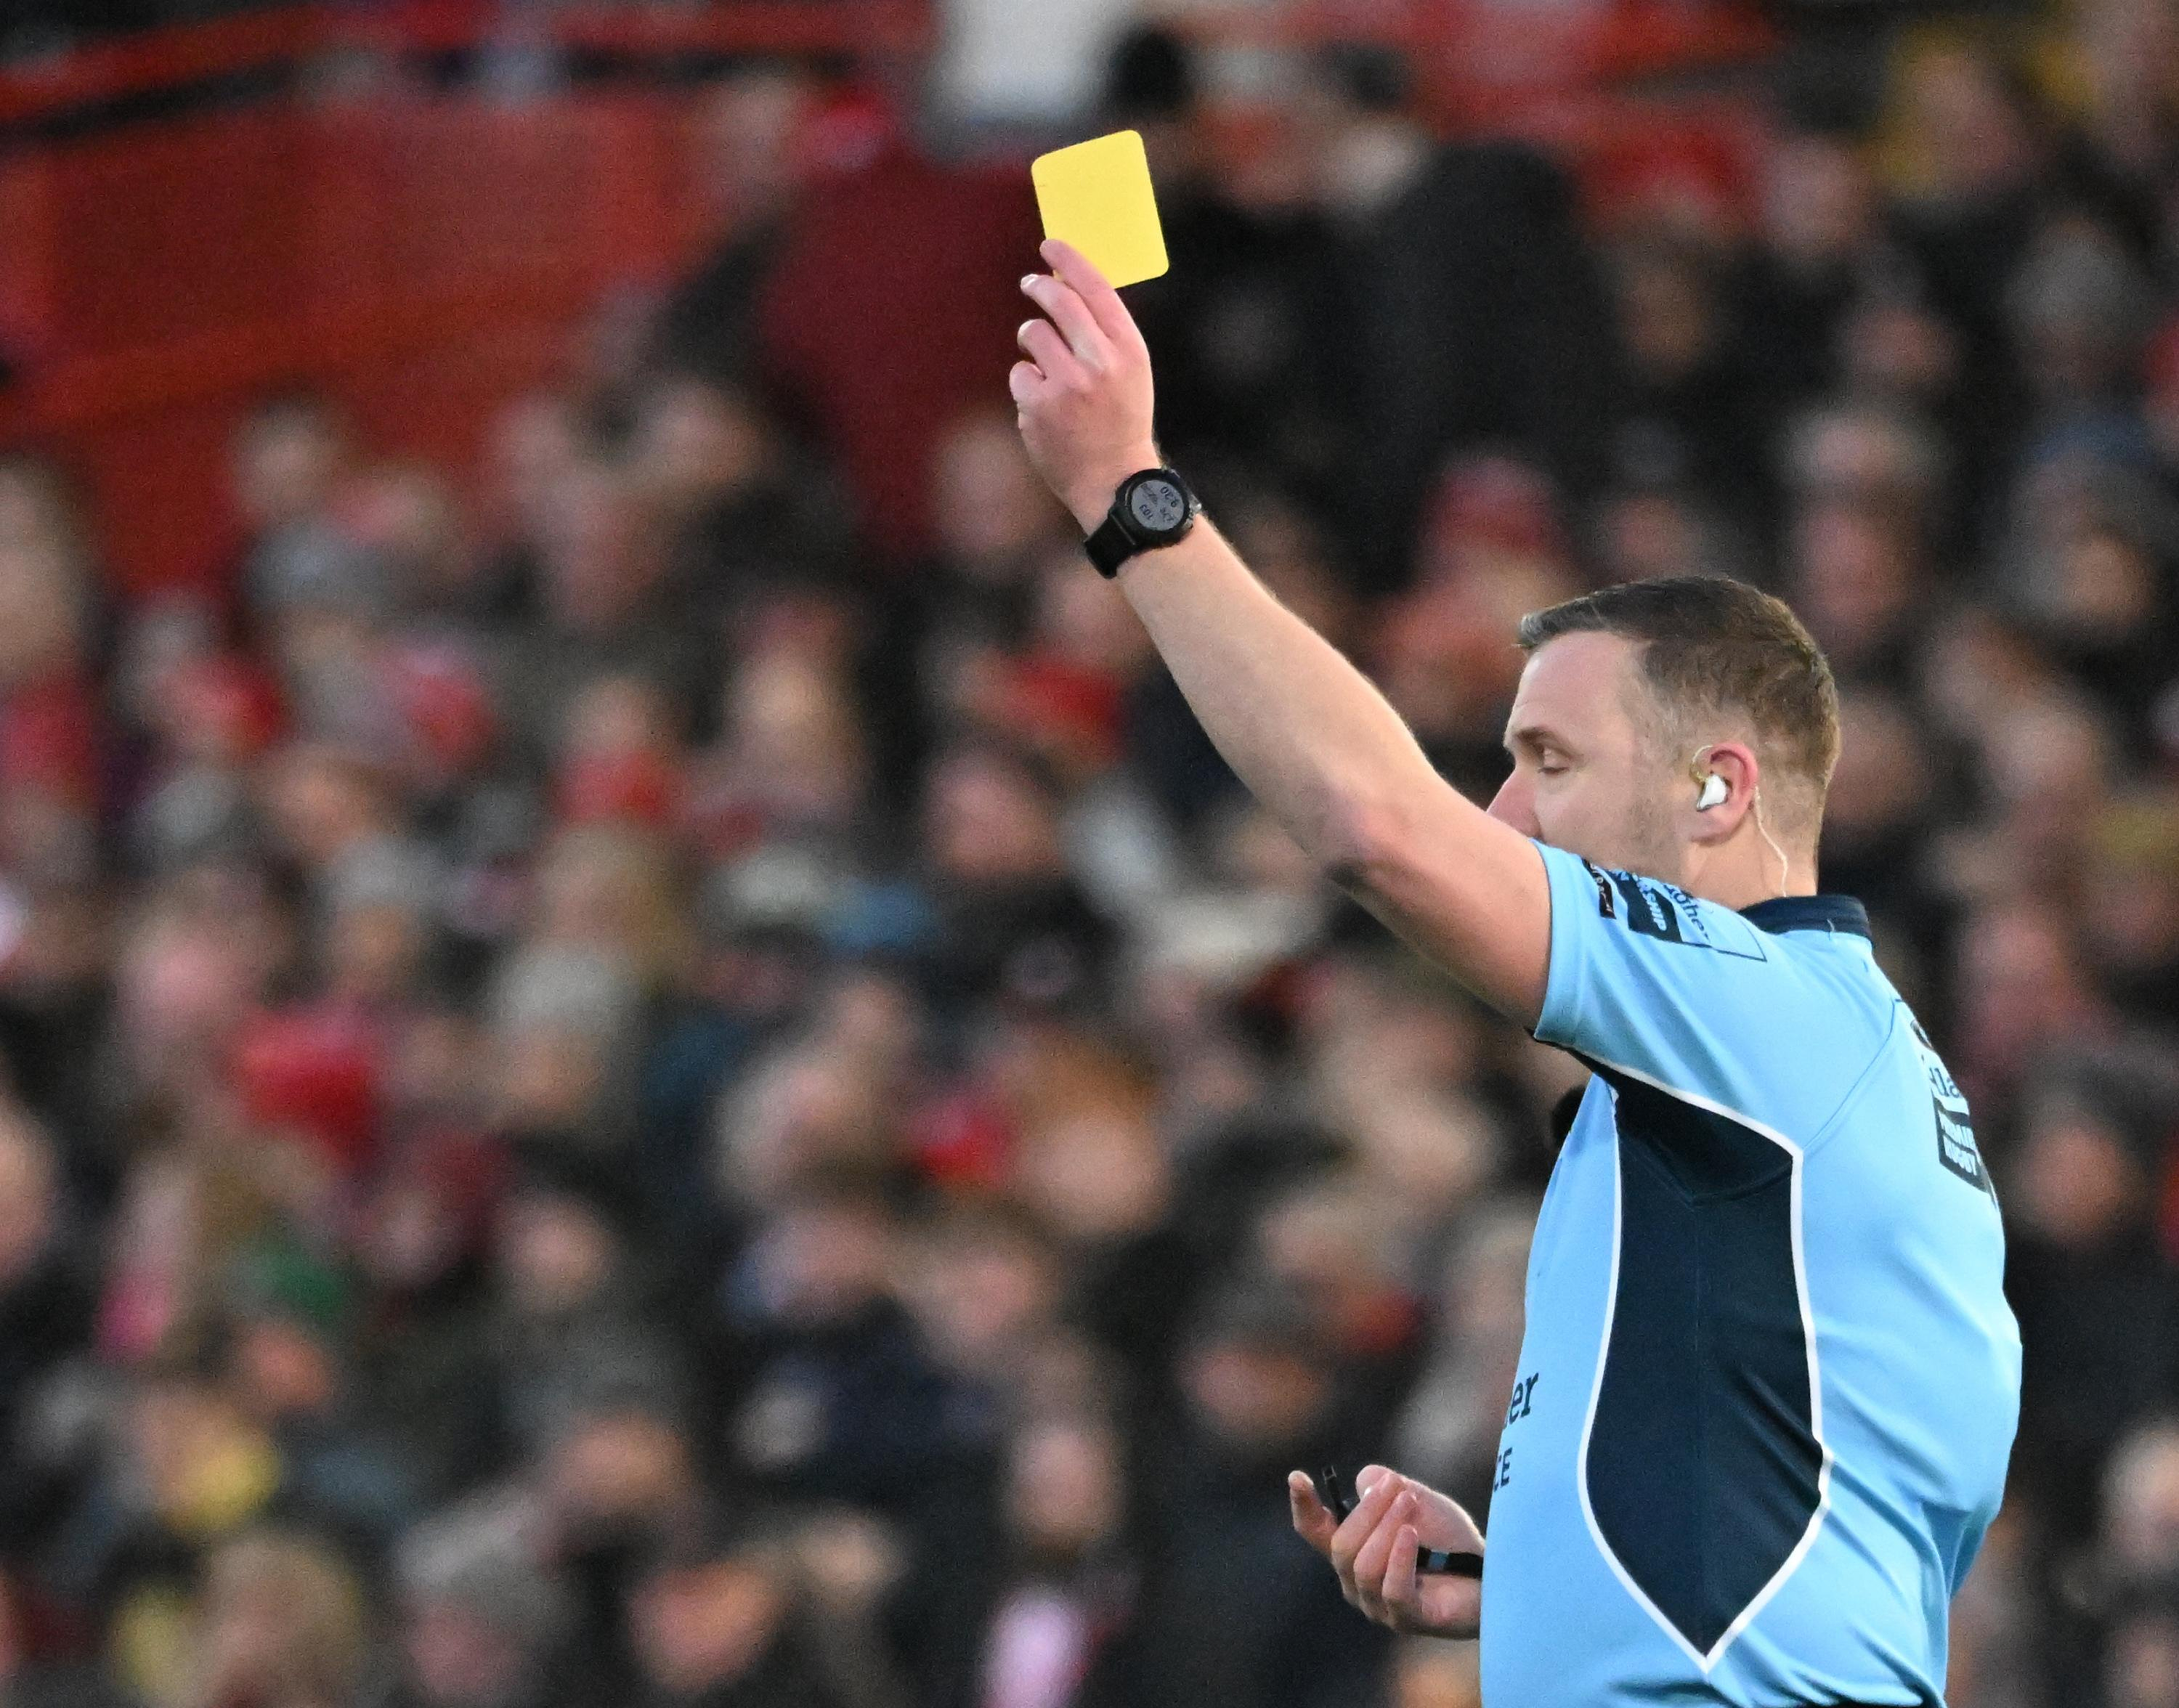 Rugby: insulted and threatened, the video referee of the World Cup final throws in the towel